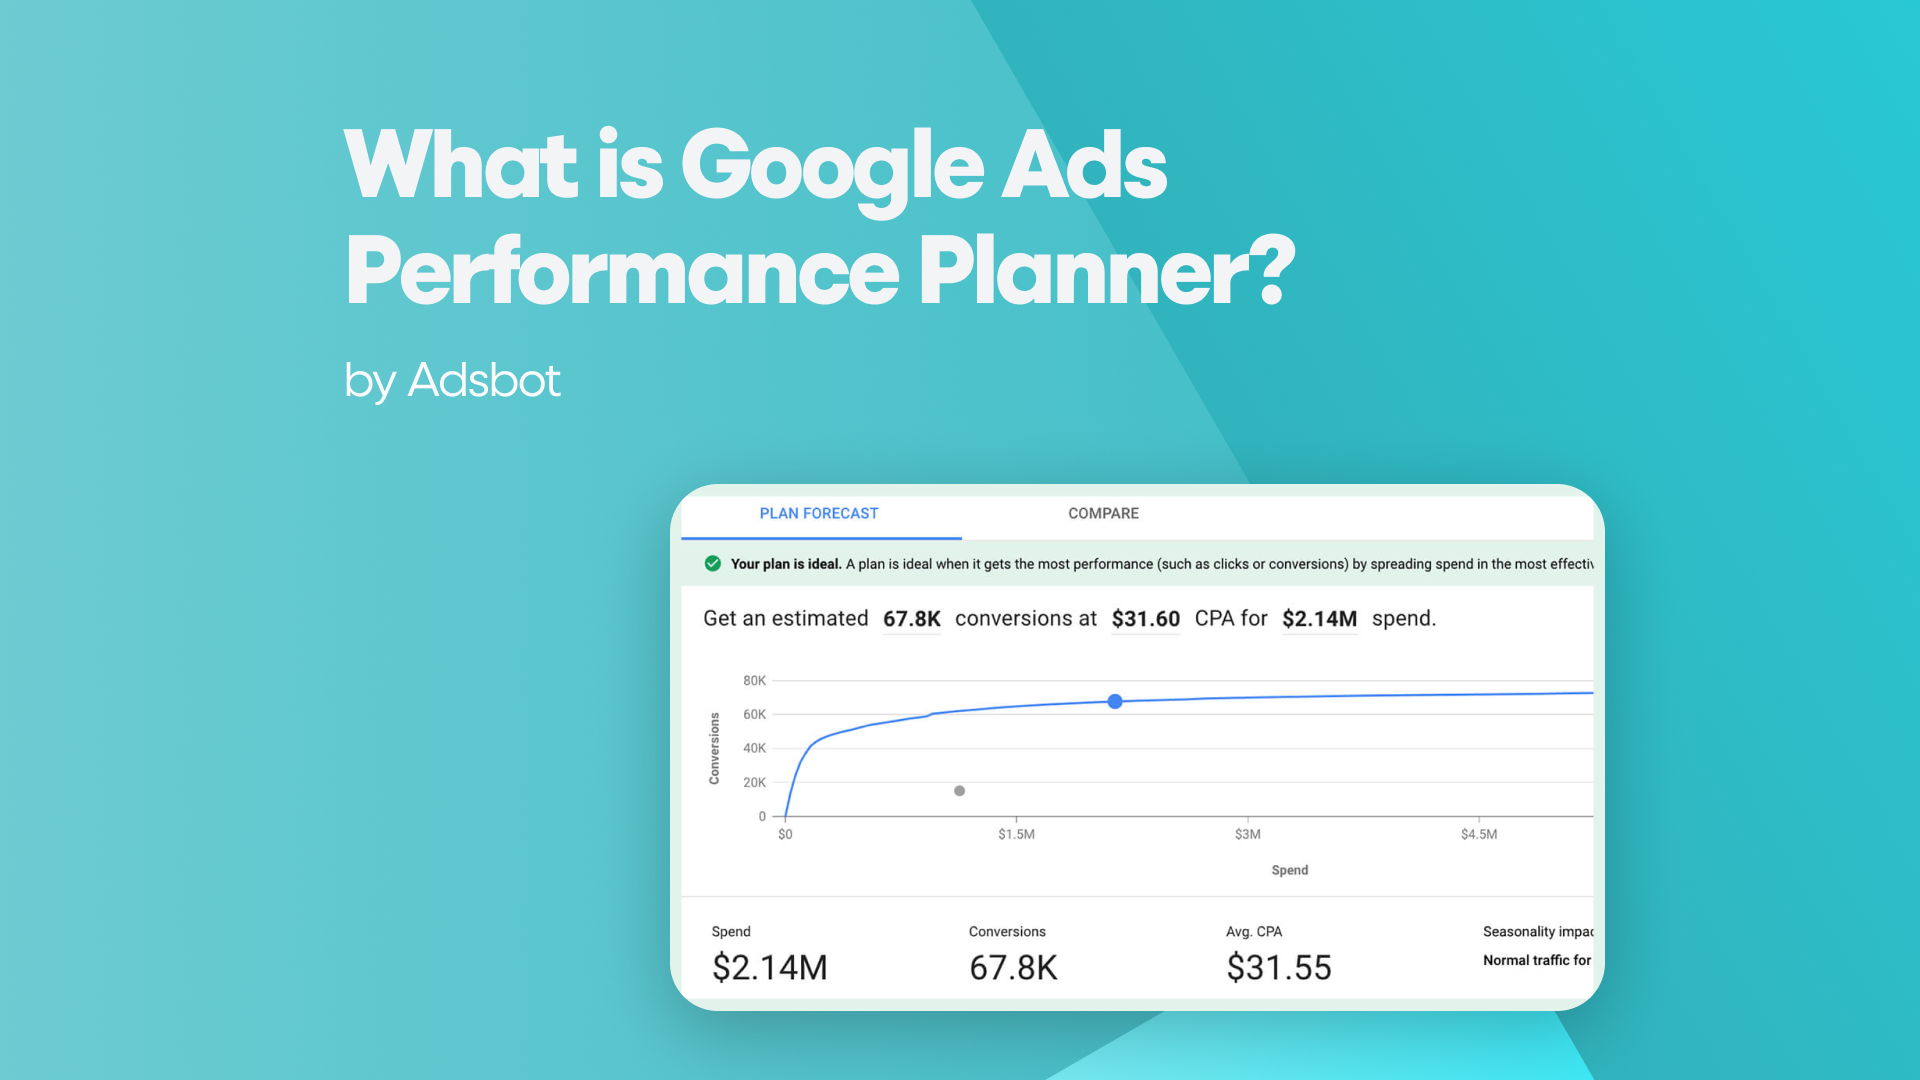 What Is Google Ads Performance Planner?